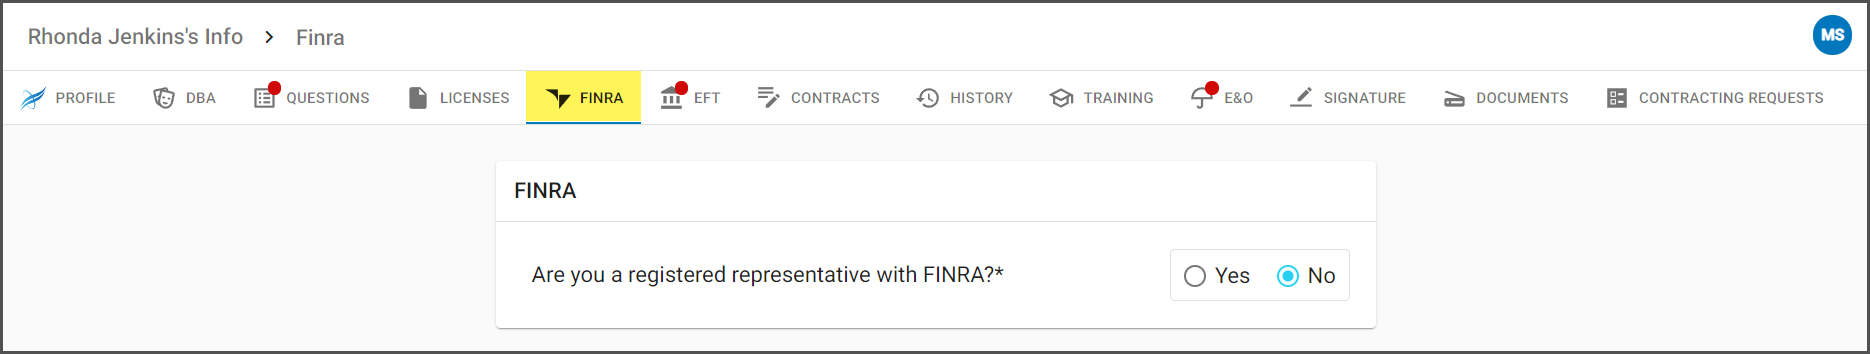 RJ_Finra_Tab_-_Updated.png